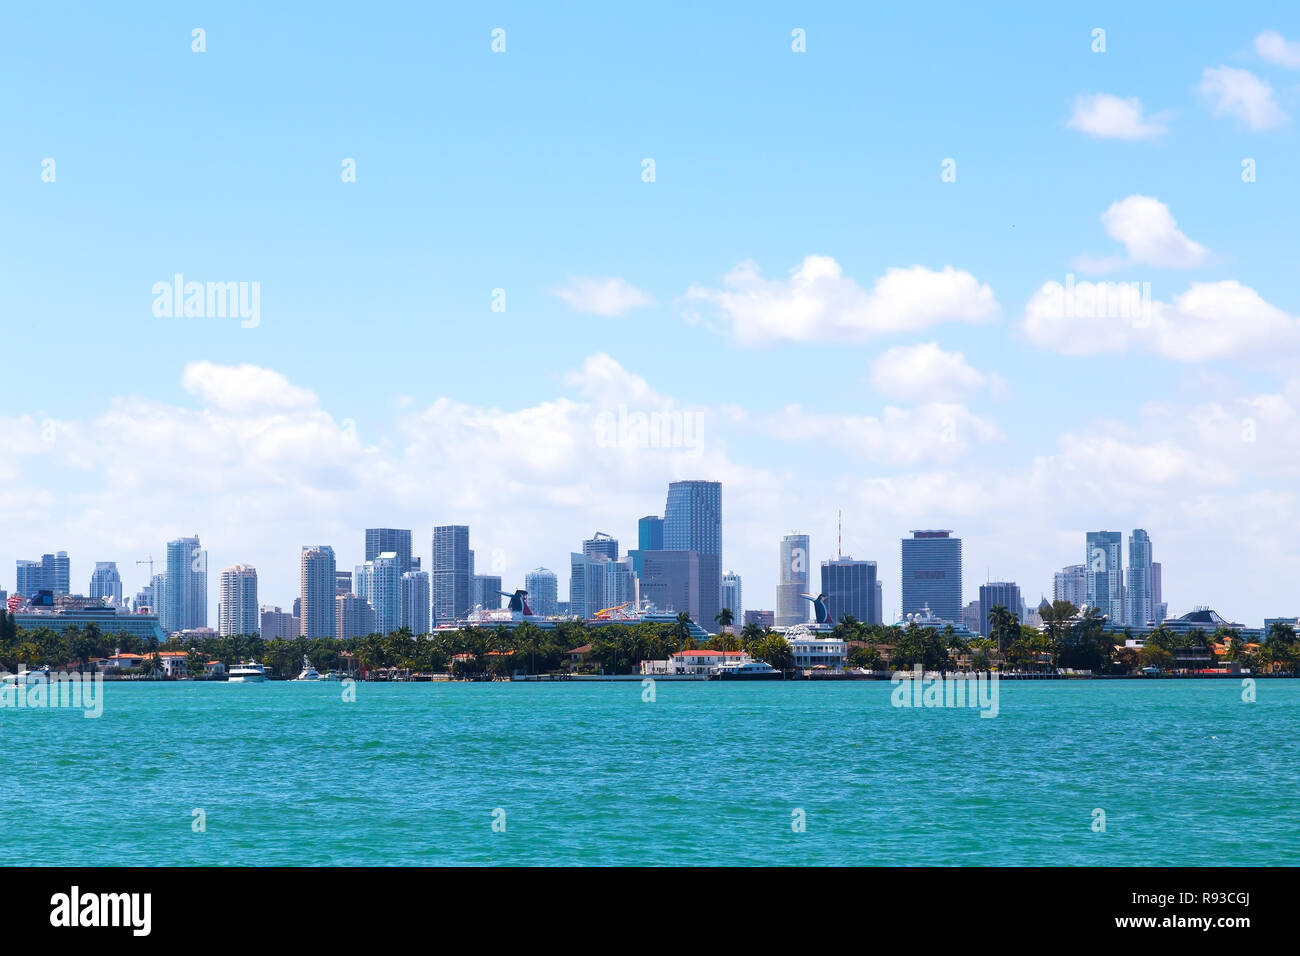 Cloudy sky over the water and Miami city, Florida. A view on Miami city skyline from Miami Beach waterfront. Stock Photo